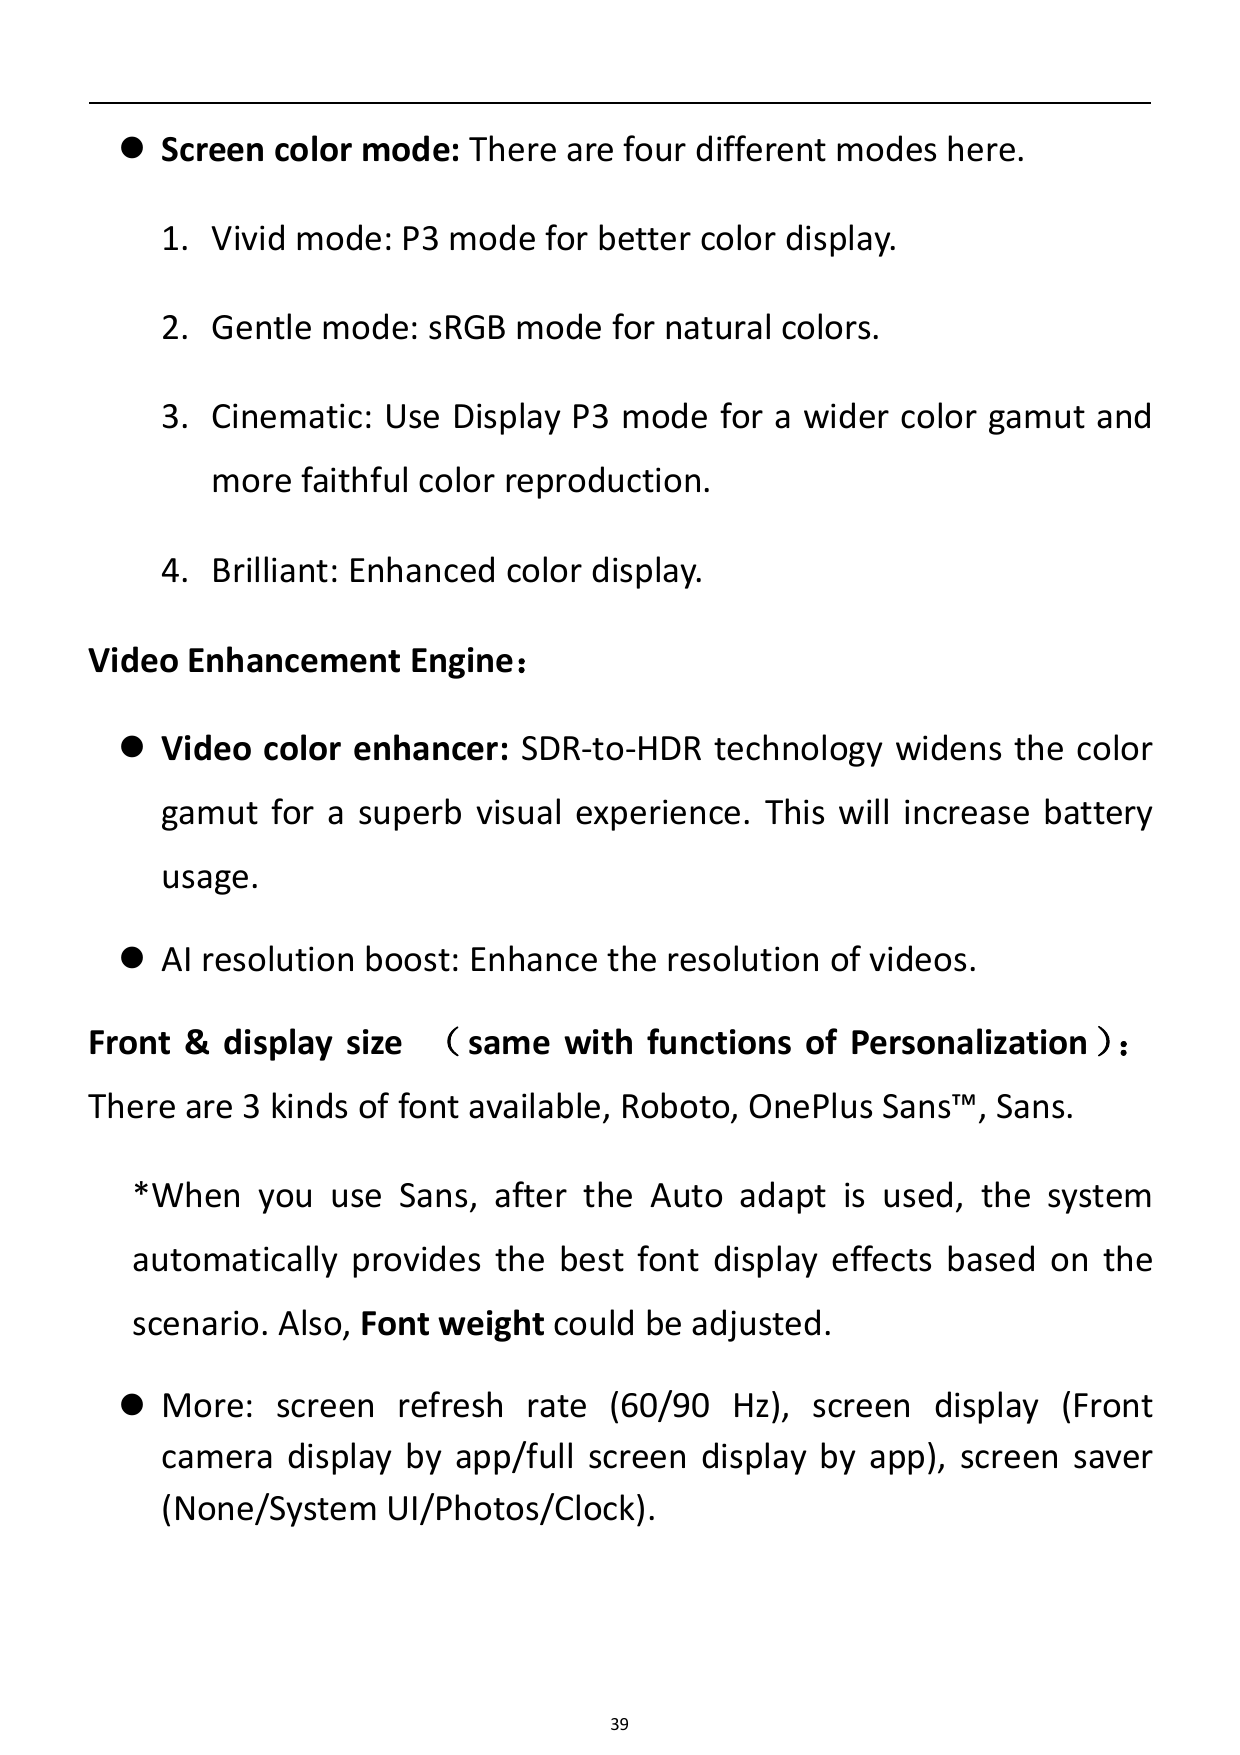  Screen color mode: There are four different modes here.1. Vivid mode: P3 mode for better color display.2. Gentle mode: sRGB mo